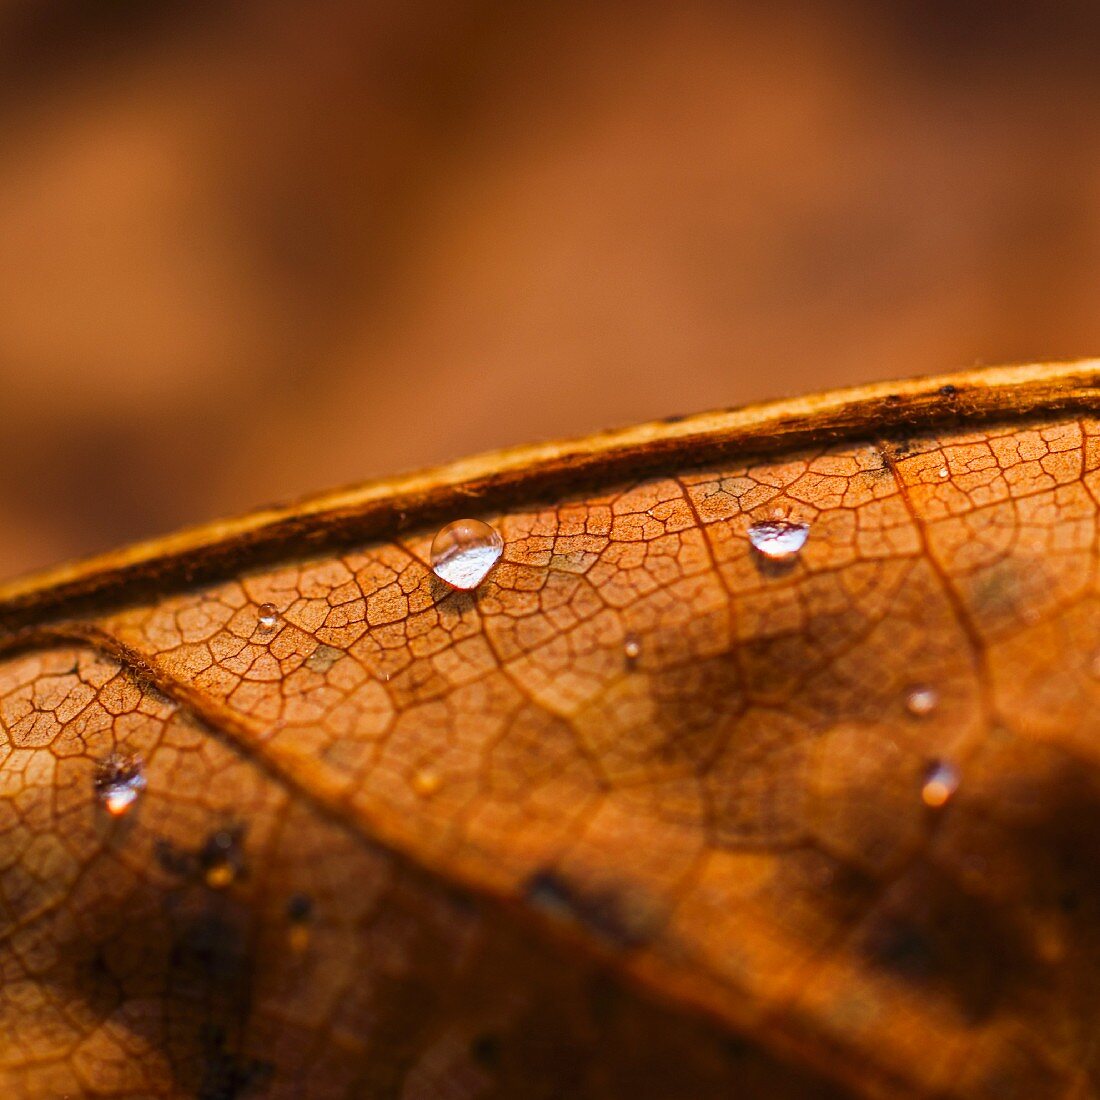 Dew drops on brown autumn leaf (close-up)